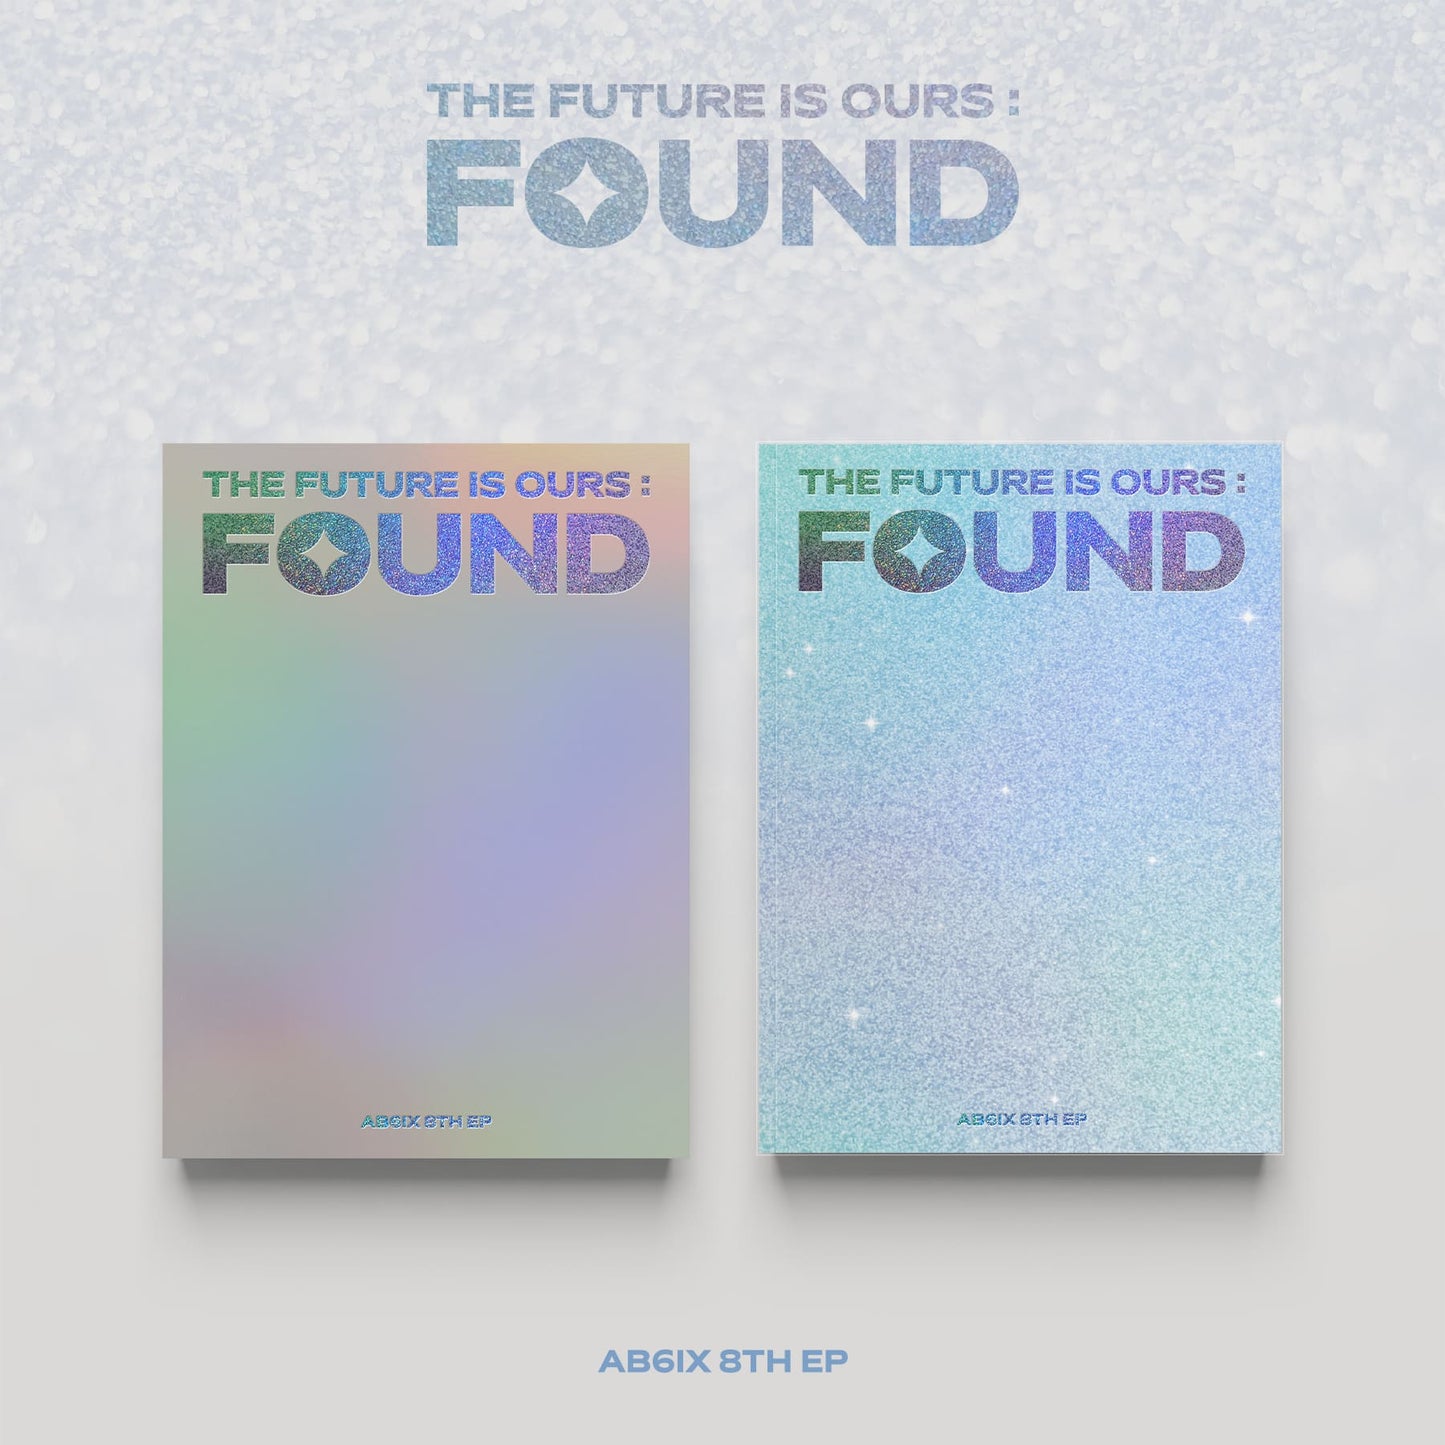 [PRE-ORDER] AB6IX - 8th EP Album [THE FUTURE IS OURS : FOUND] (Standard Ver.)